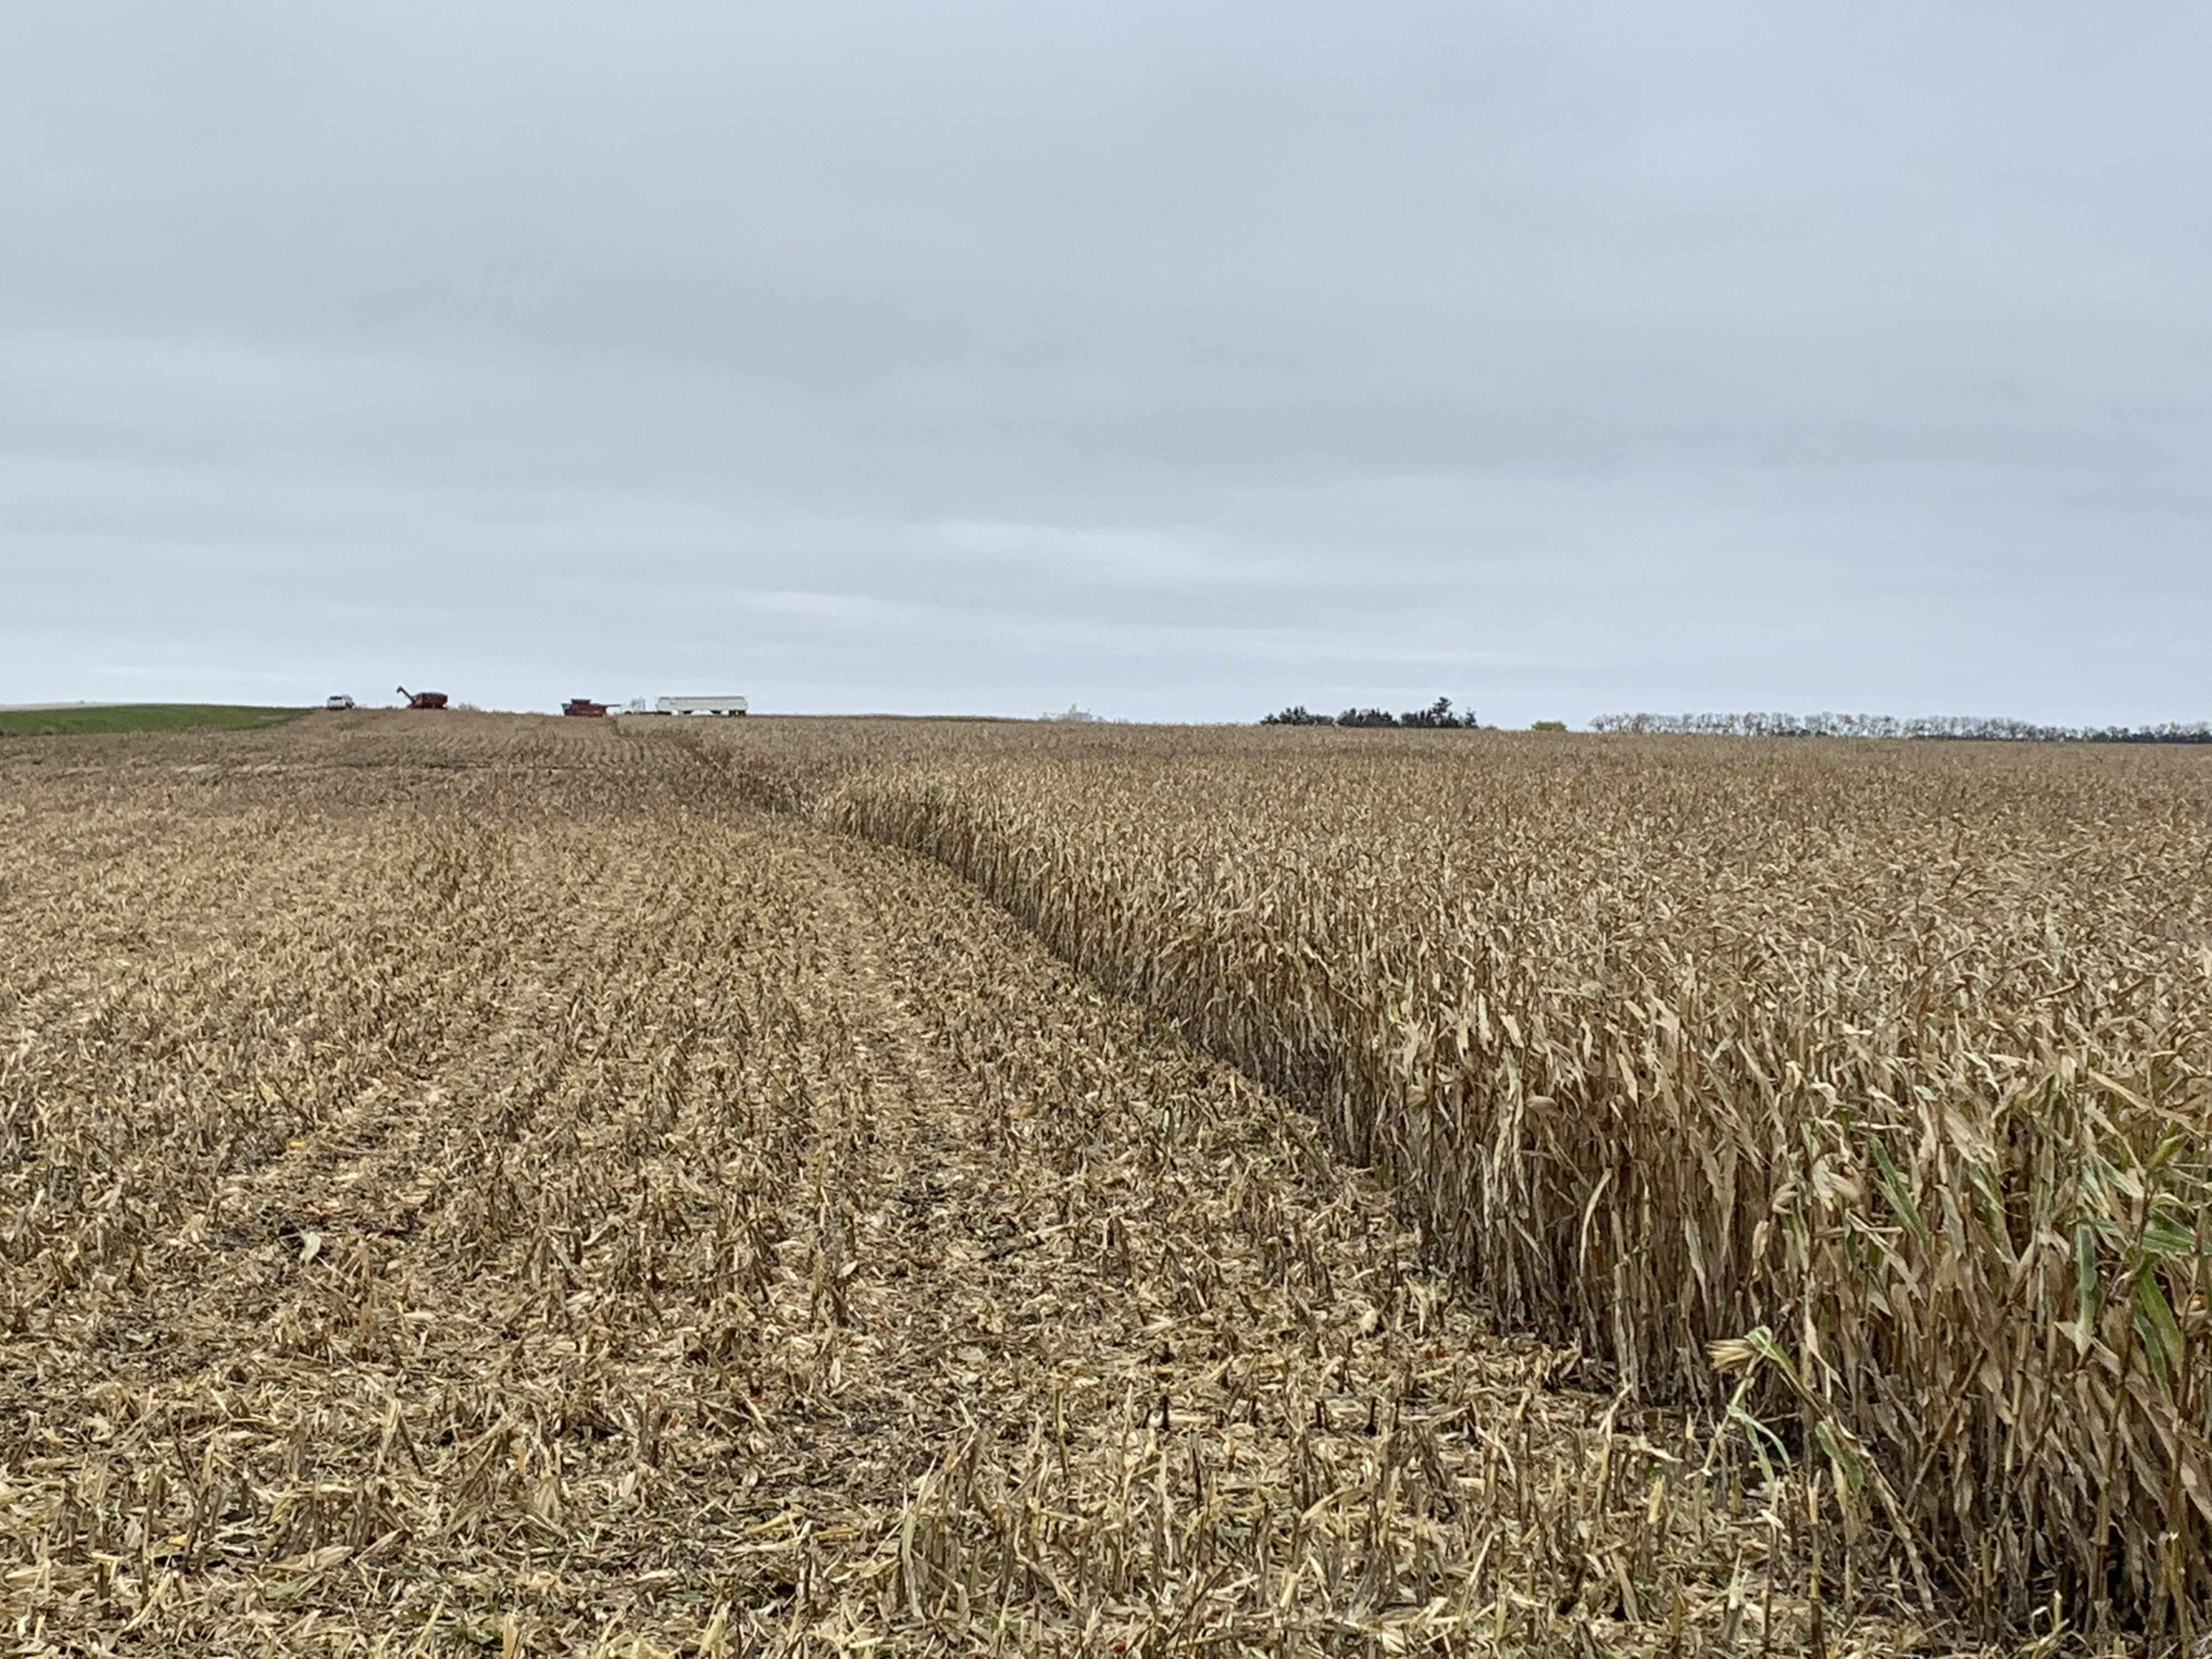 Morning Ag News, February 22, 2022: Time for farmers to make crop insurance decisions